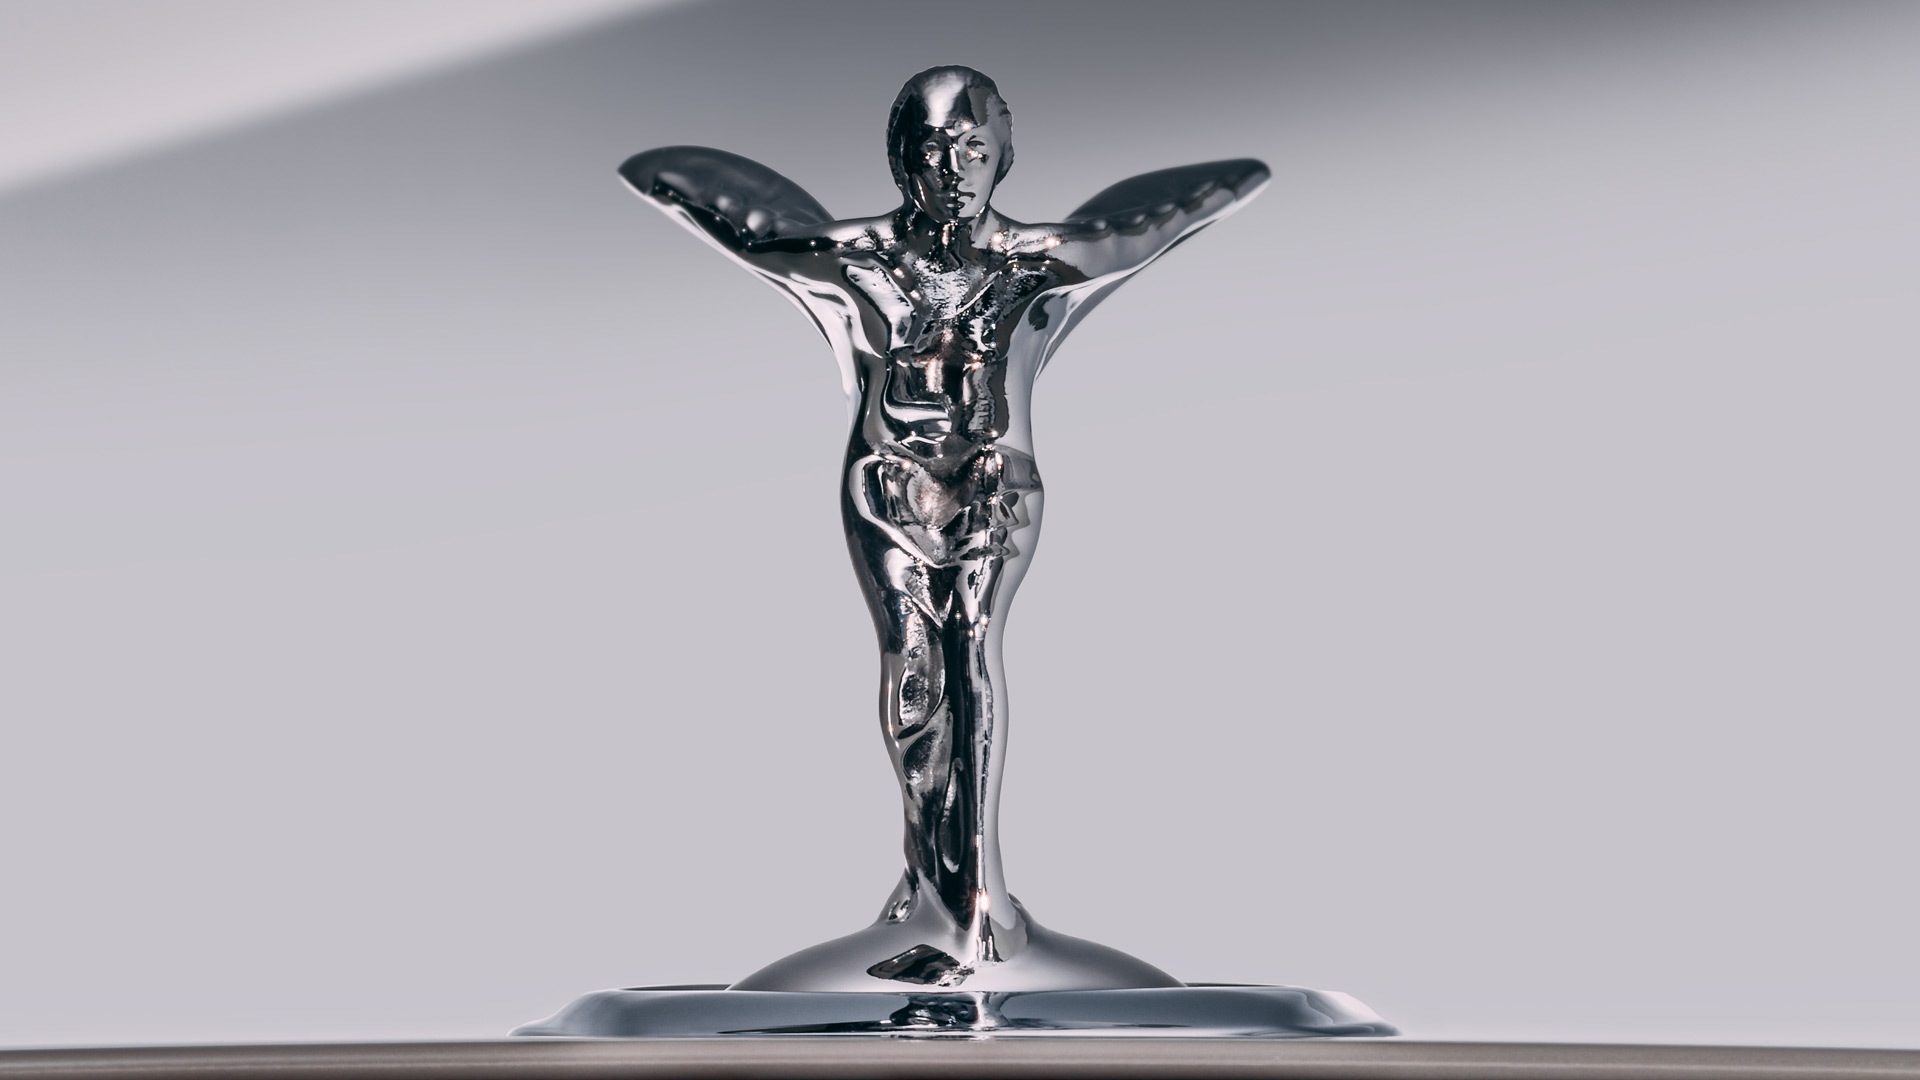 Rolls-Royce's Spirit of Ecstasy redesigned for the electric era